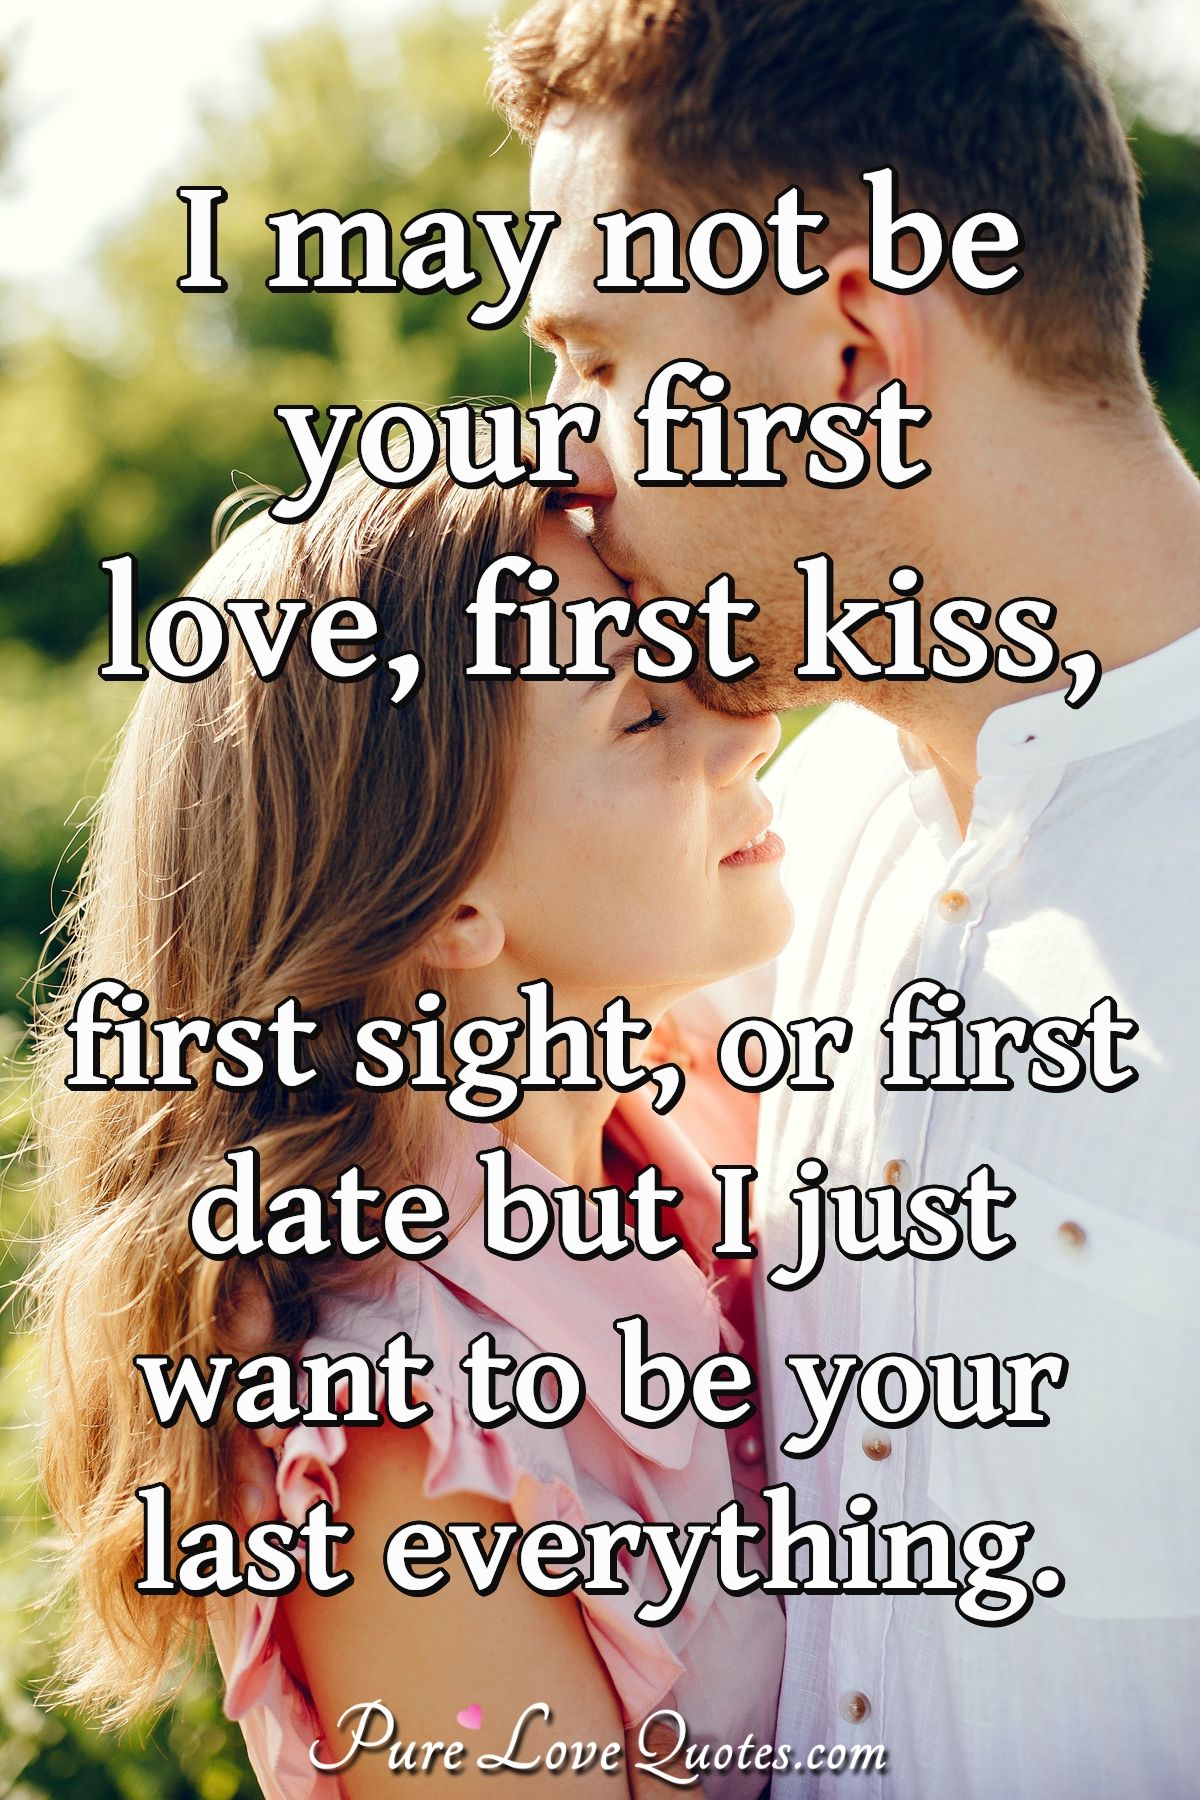 I may not be your first love, first kiss, first sight, or first date